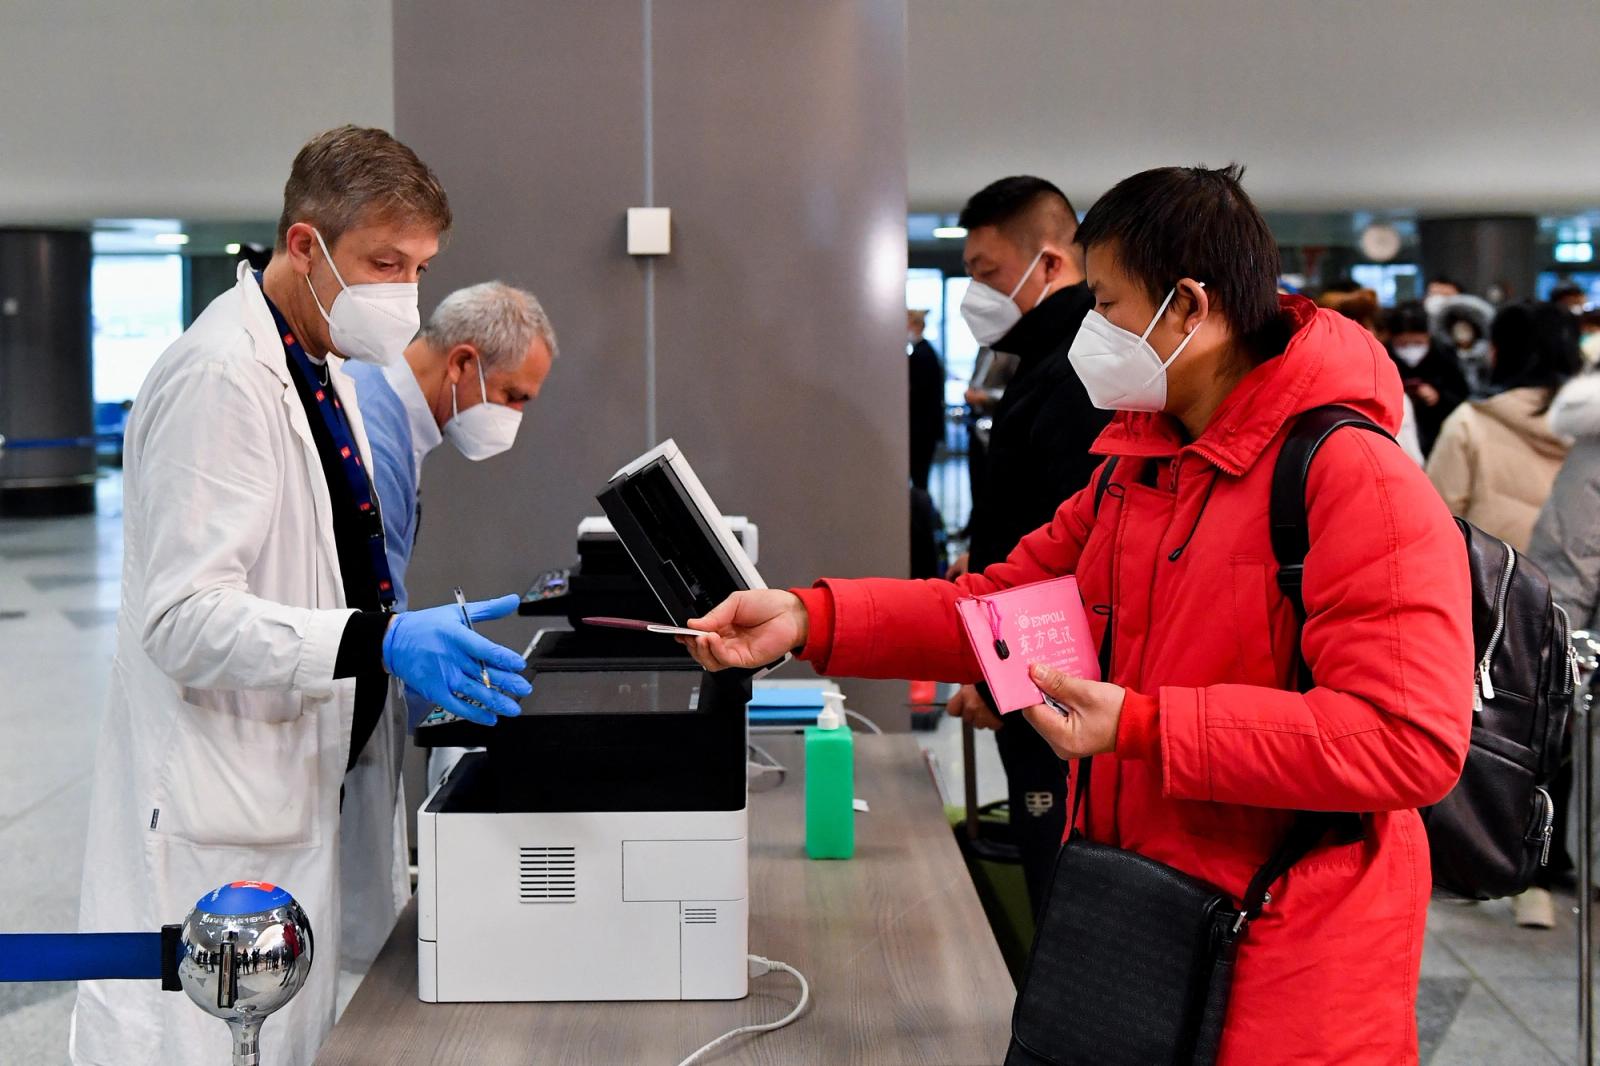 A passenger gives his passport to a worker, after Italy has ordered coronavirus disease (COVID-19) antigen swabs and virus sequencing for all travellers coming from China, where cases are surging, at the Malpensa Airport in Milan.